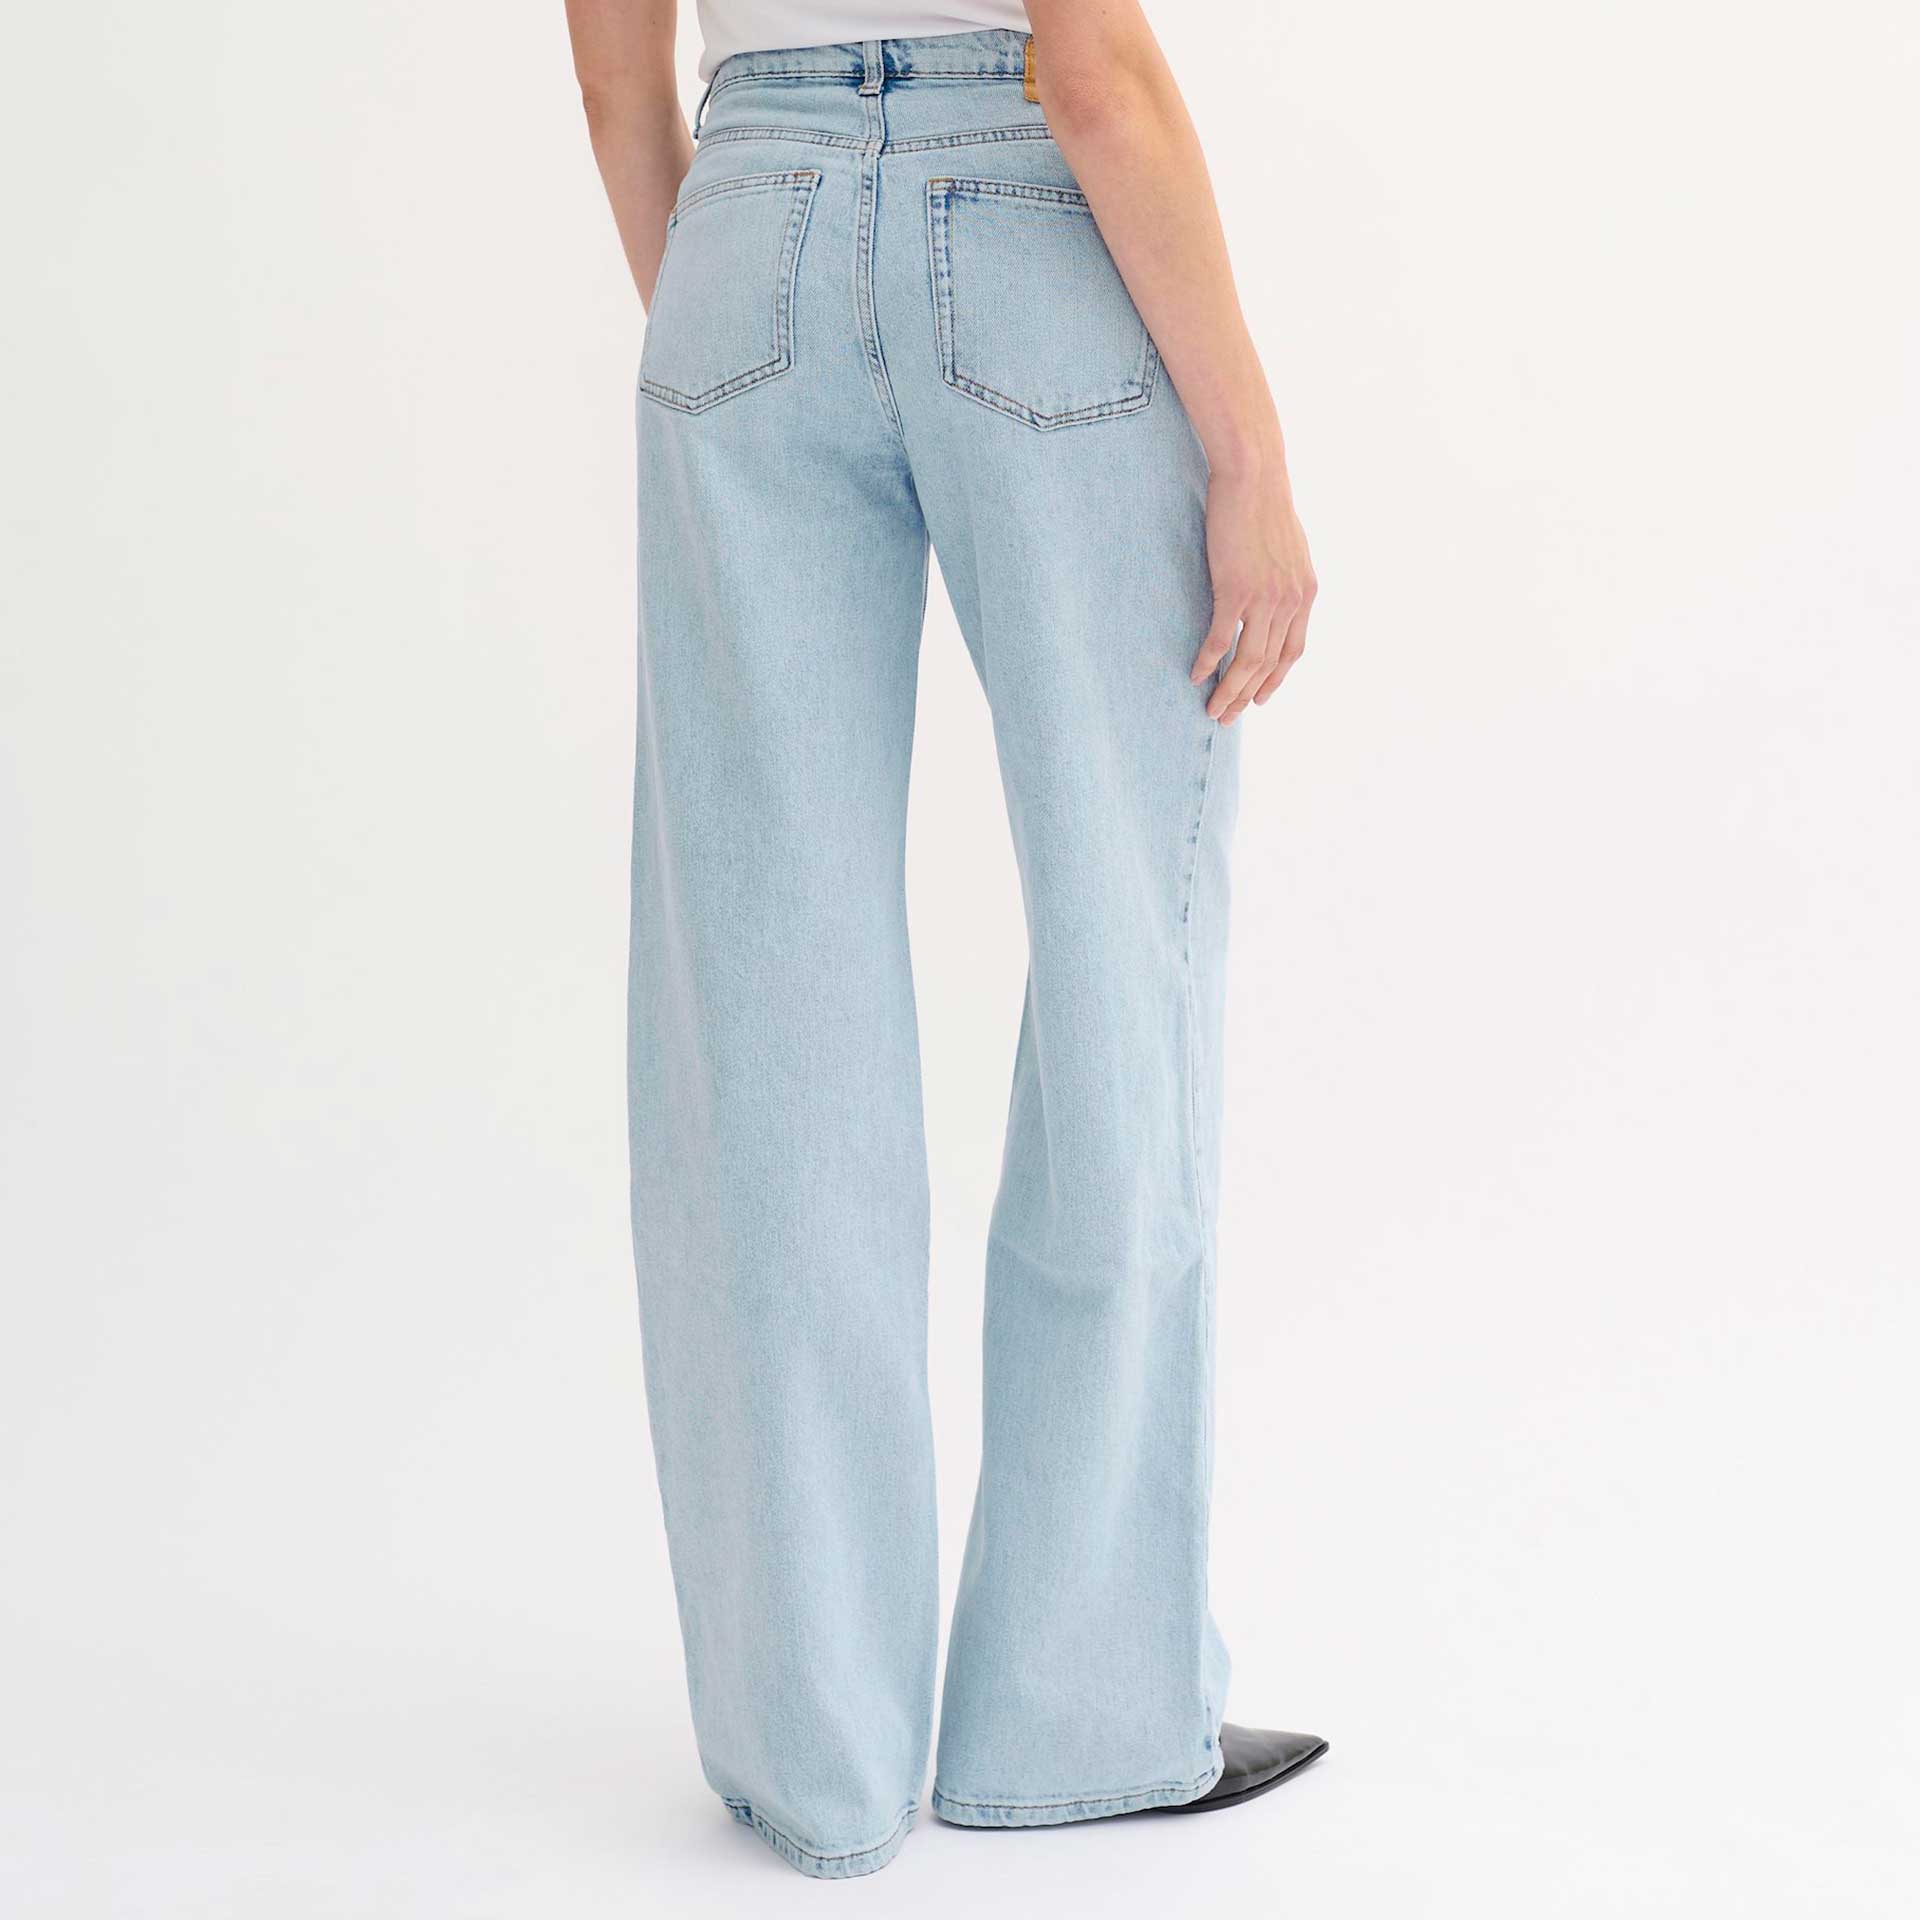 My Essential Wardrobe Jeans 35 The Louis 139 2